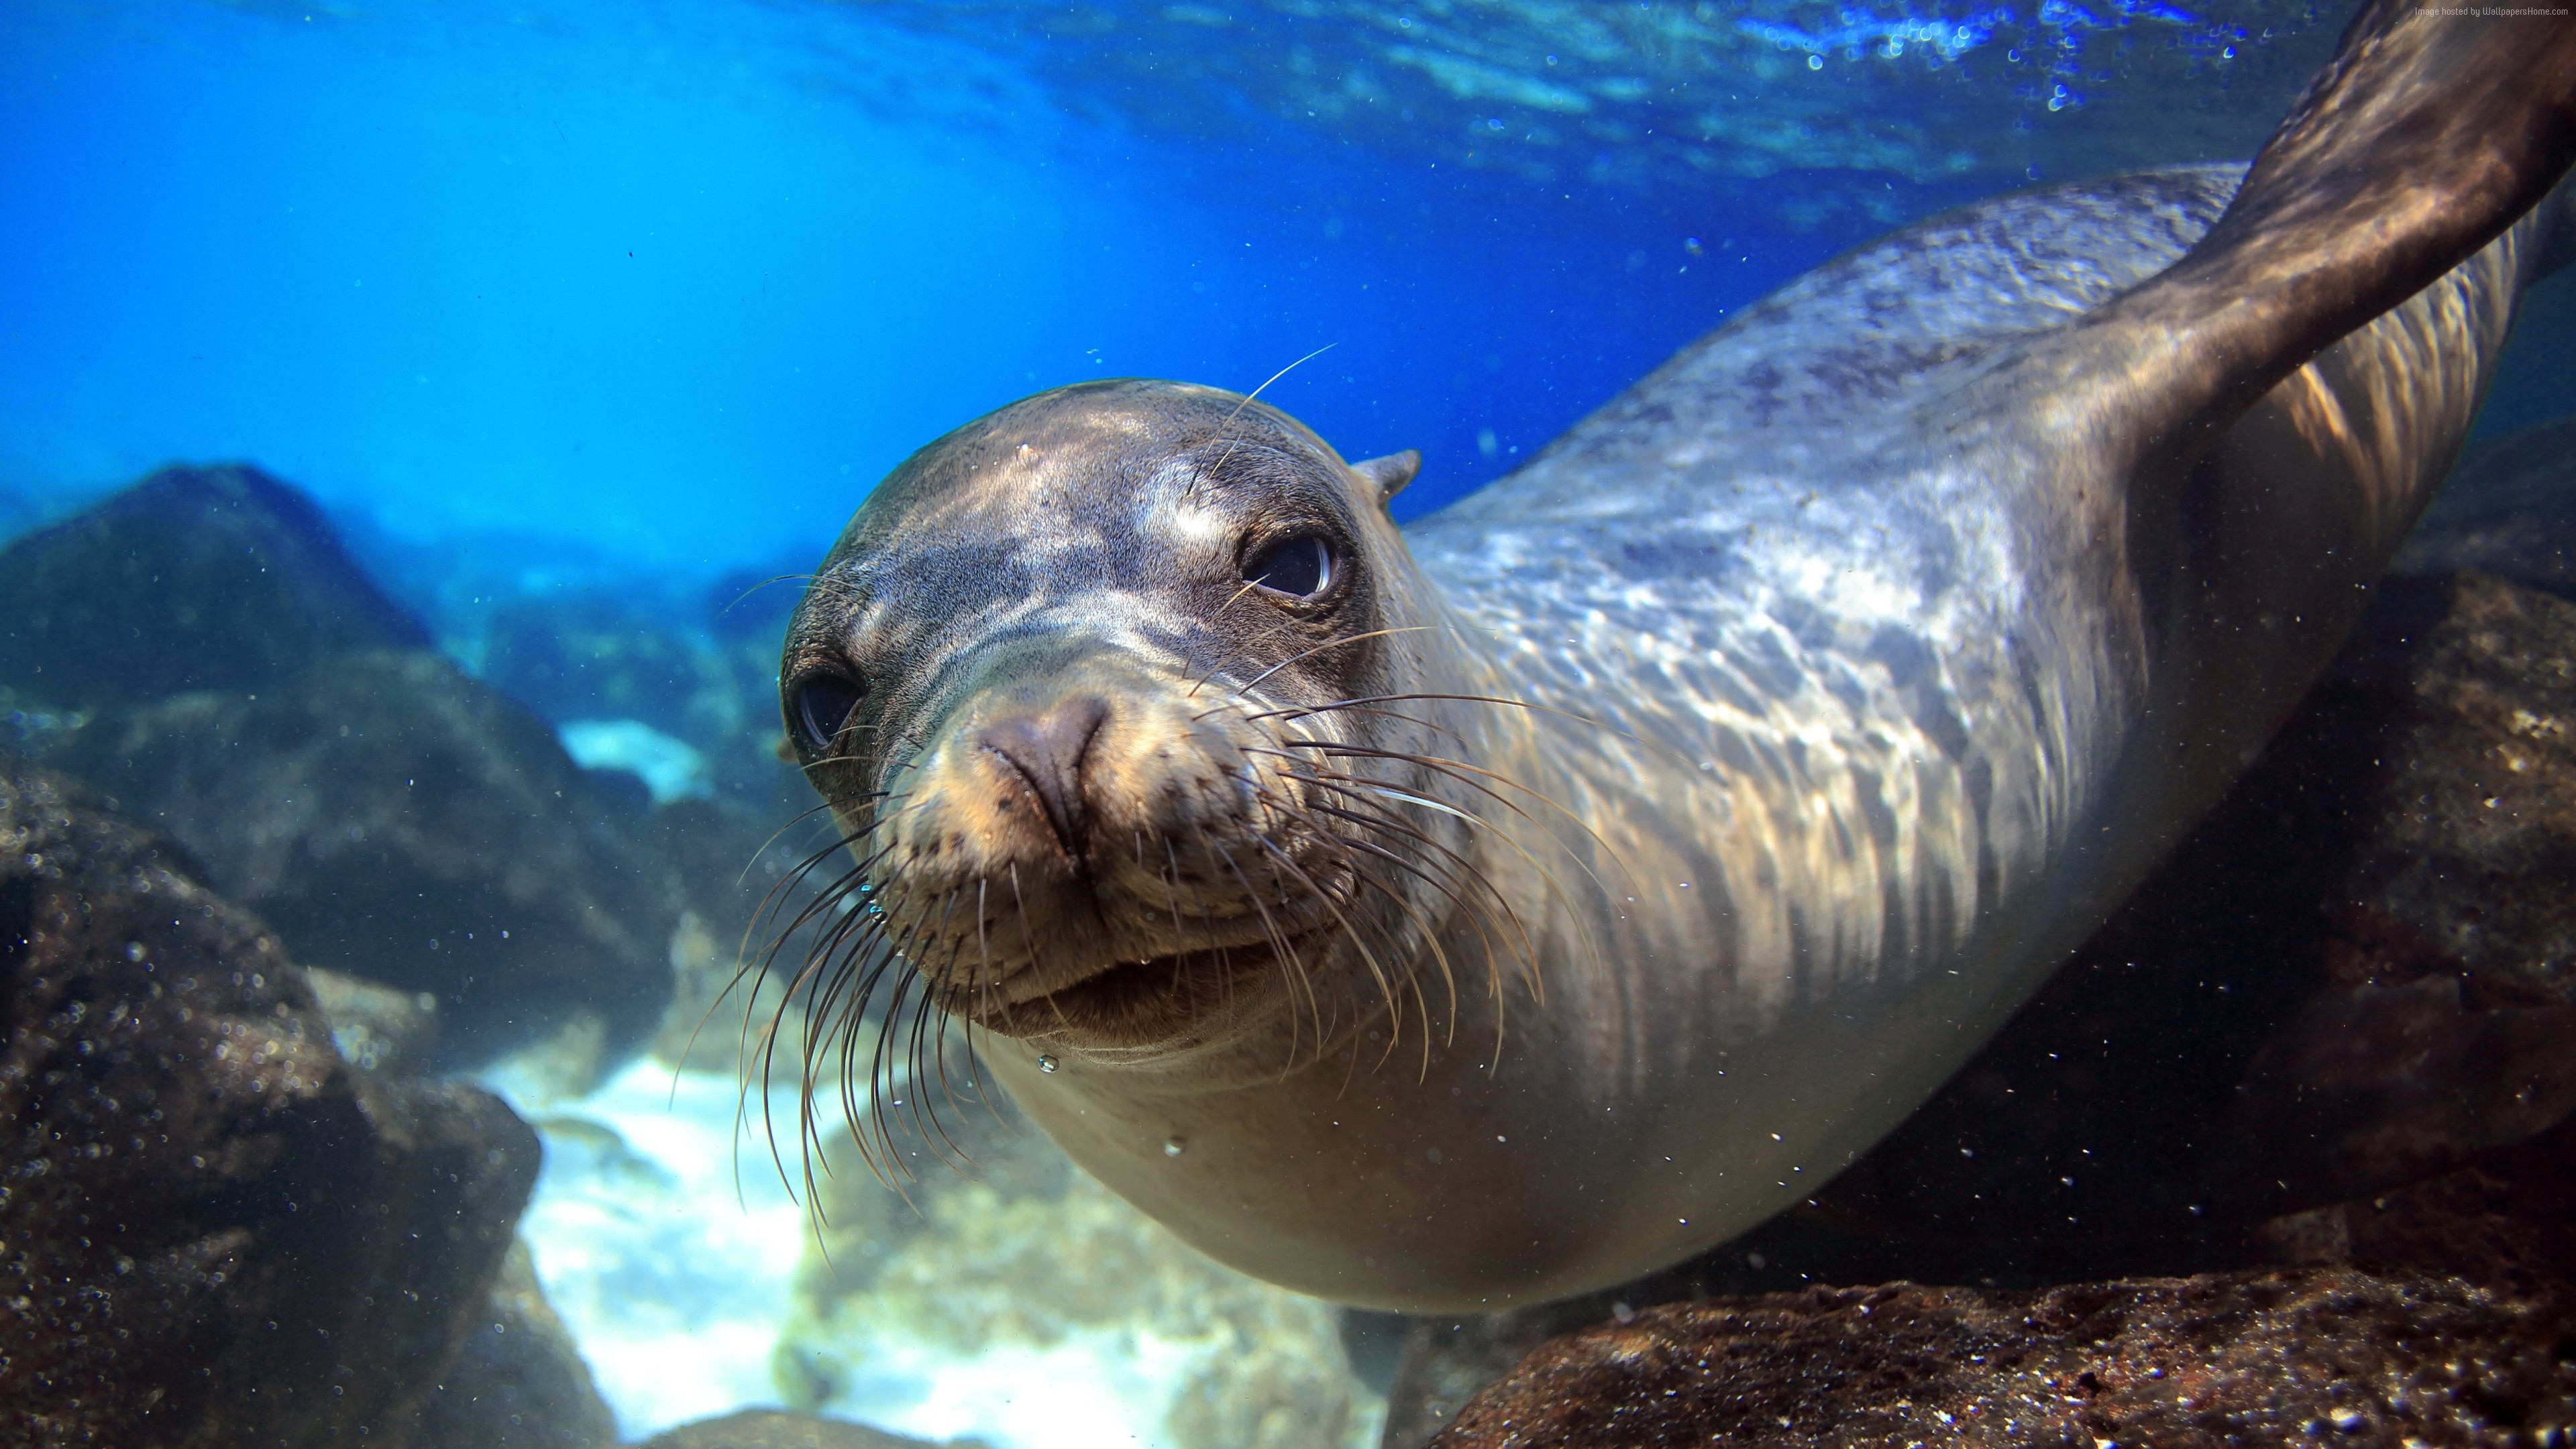 San Diego sea lions: What to know before visiting La Jolla Cove